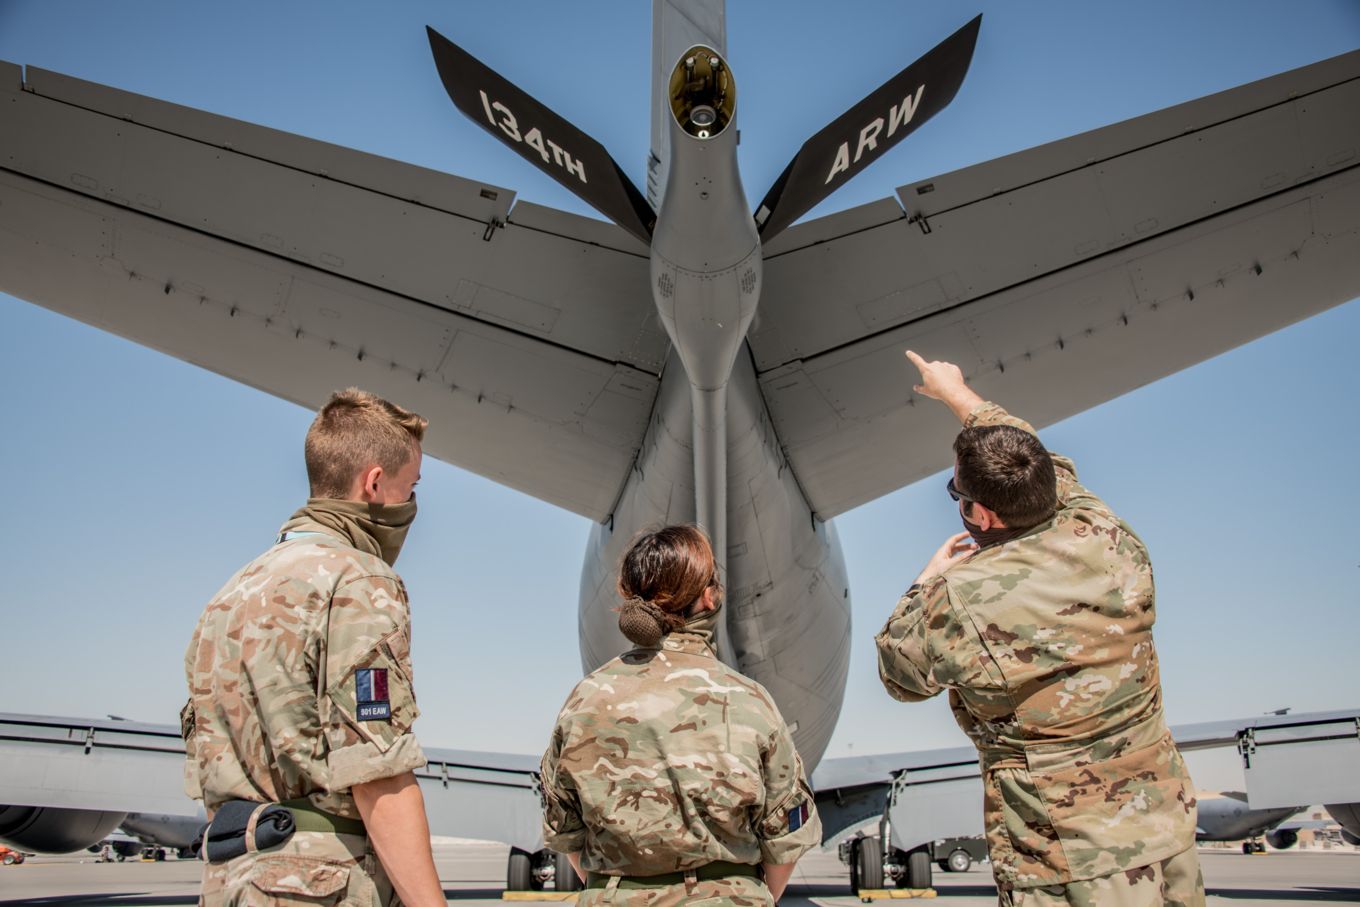 Image shows RAF and US Air Force personnel looking at the rear of an aircraft.